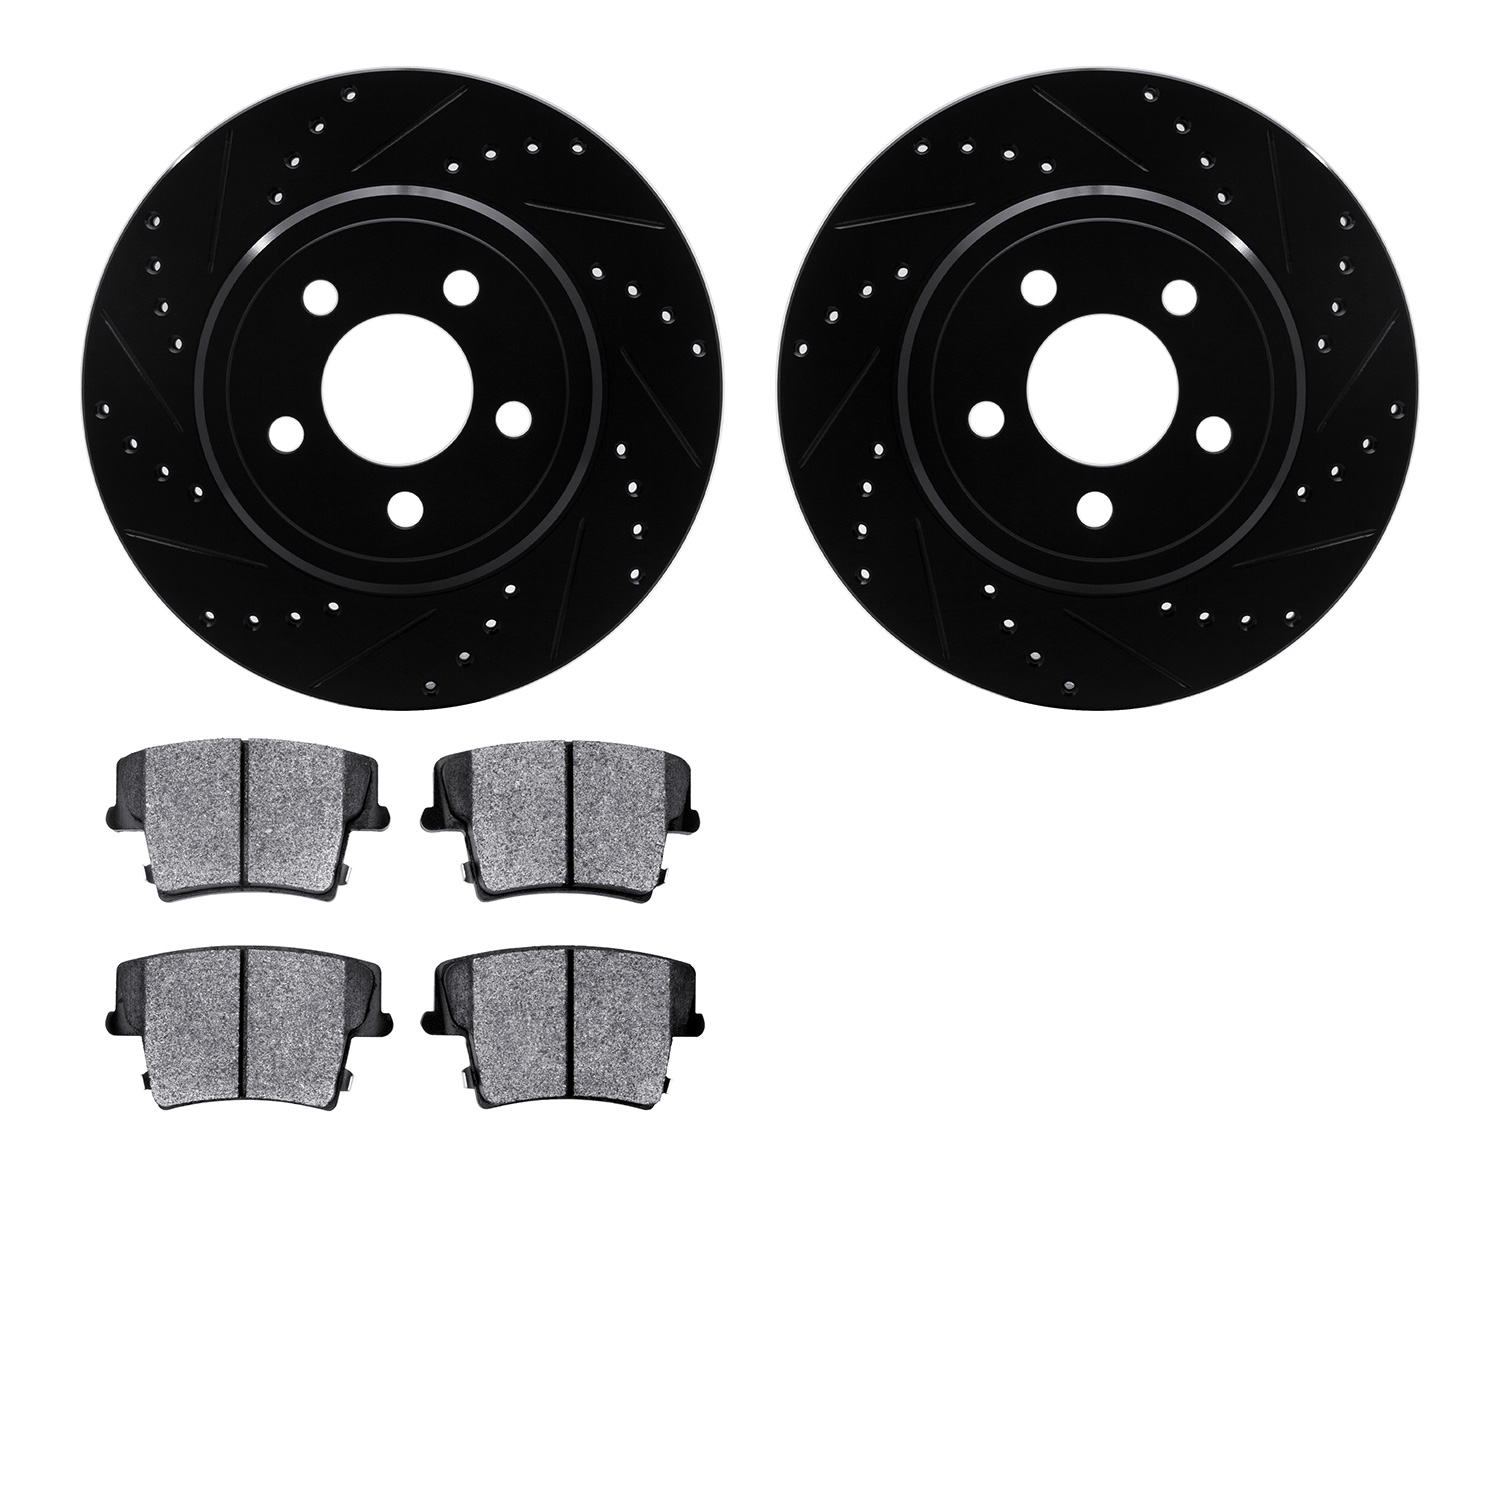 8202-39027 Drilled/Slotted Rotors w/Heavy-Duty Brake Pads Kit [Silver], Fits Select Mopar, Position: Rear